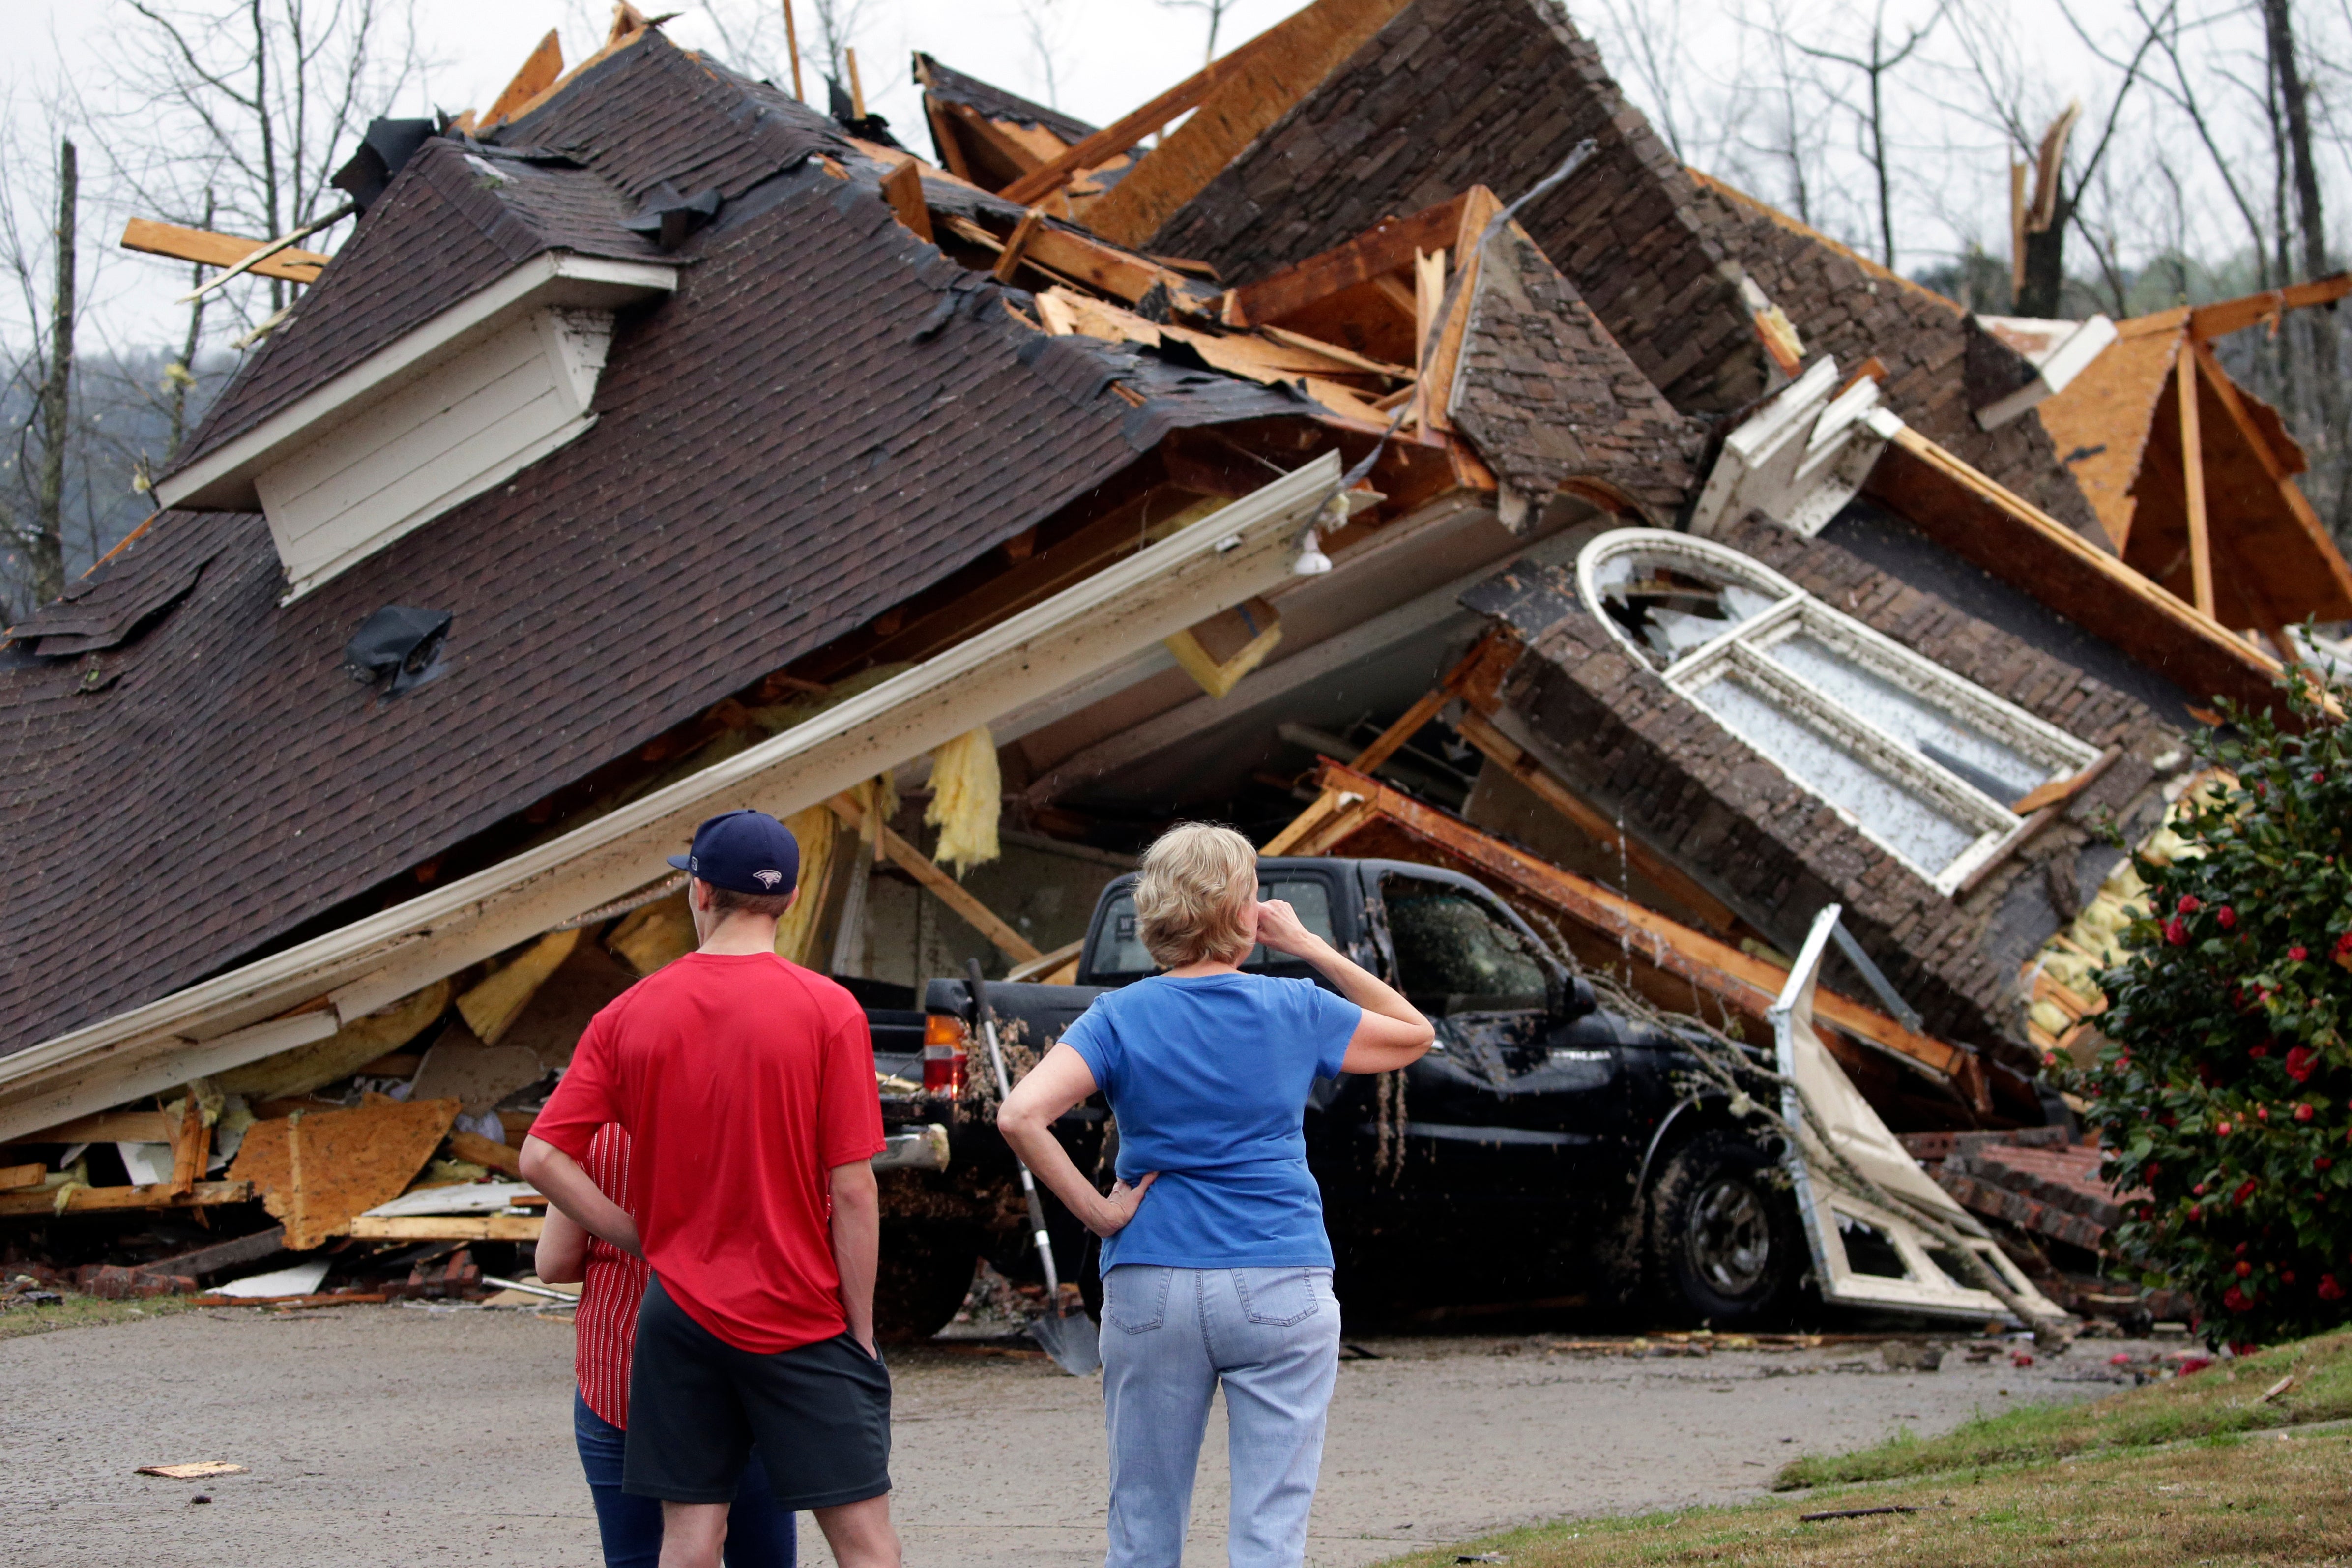 Residents survey damage to homes after a tornado touches down south of Birmingham, Ala. in the Eagle Point community damaging multiple homes, Thursday, March 25, 2021